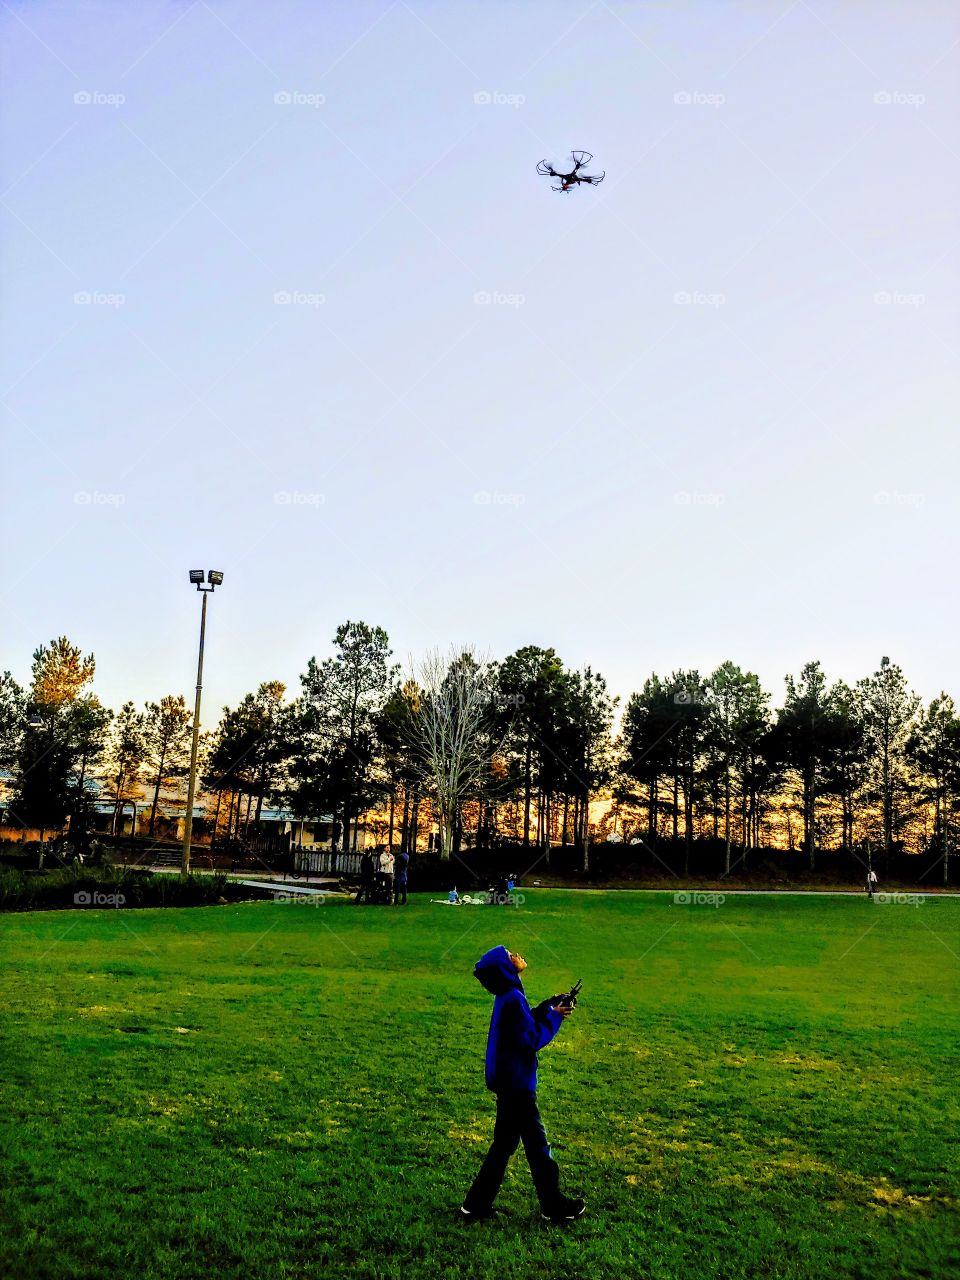 A boy and his drone